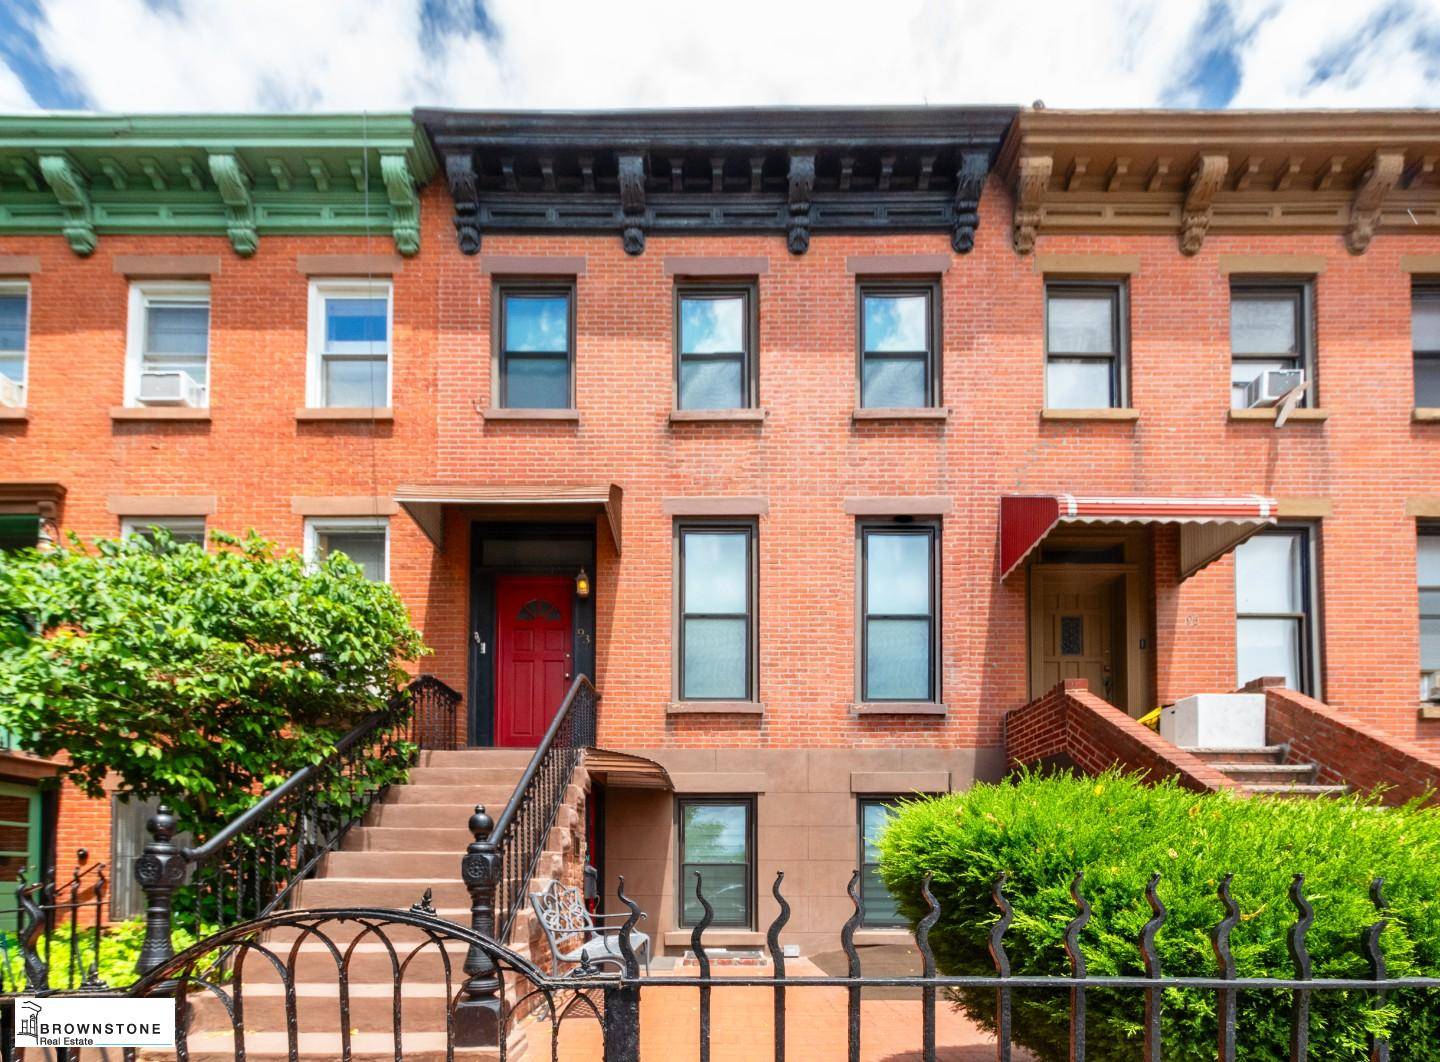 93 3rd Street is a well maintained, three family brick townhouse on the border of Gowanus and Carroll Gardens.